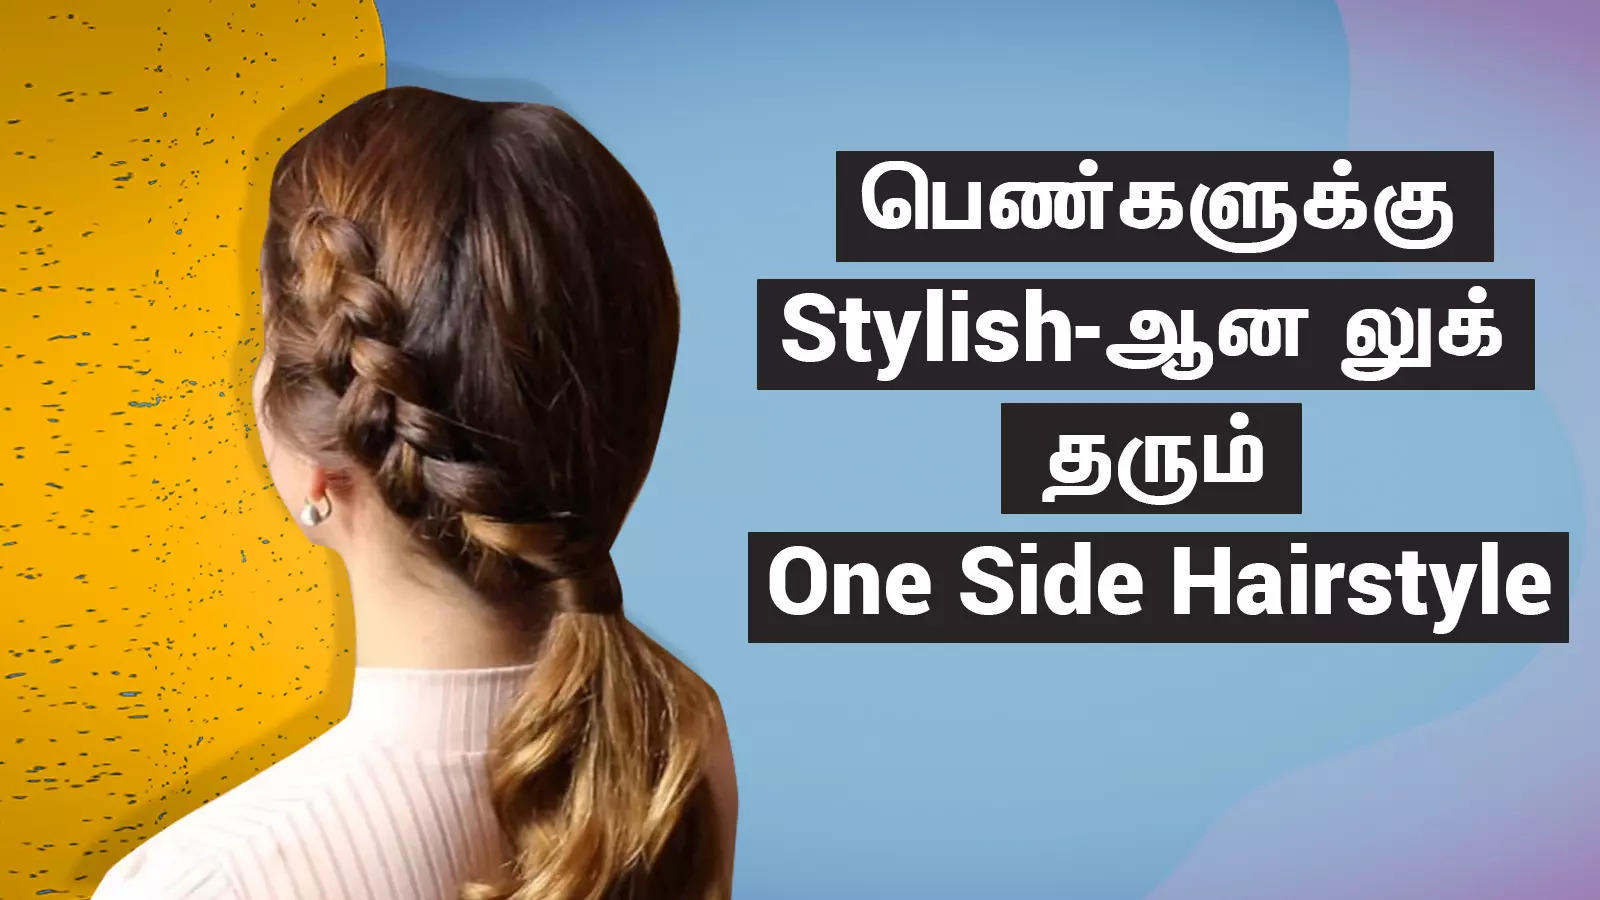 3 Easy Cute Hairstyle For Girls  Beautiful hairstyleSimple Hairstyle Hairstyle girl  YouTube